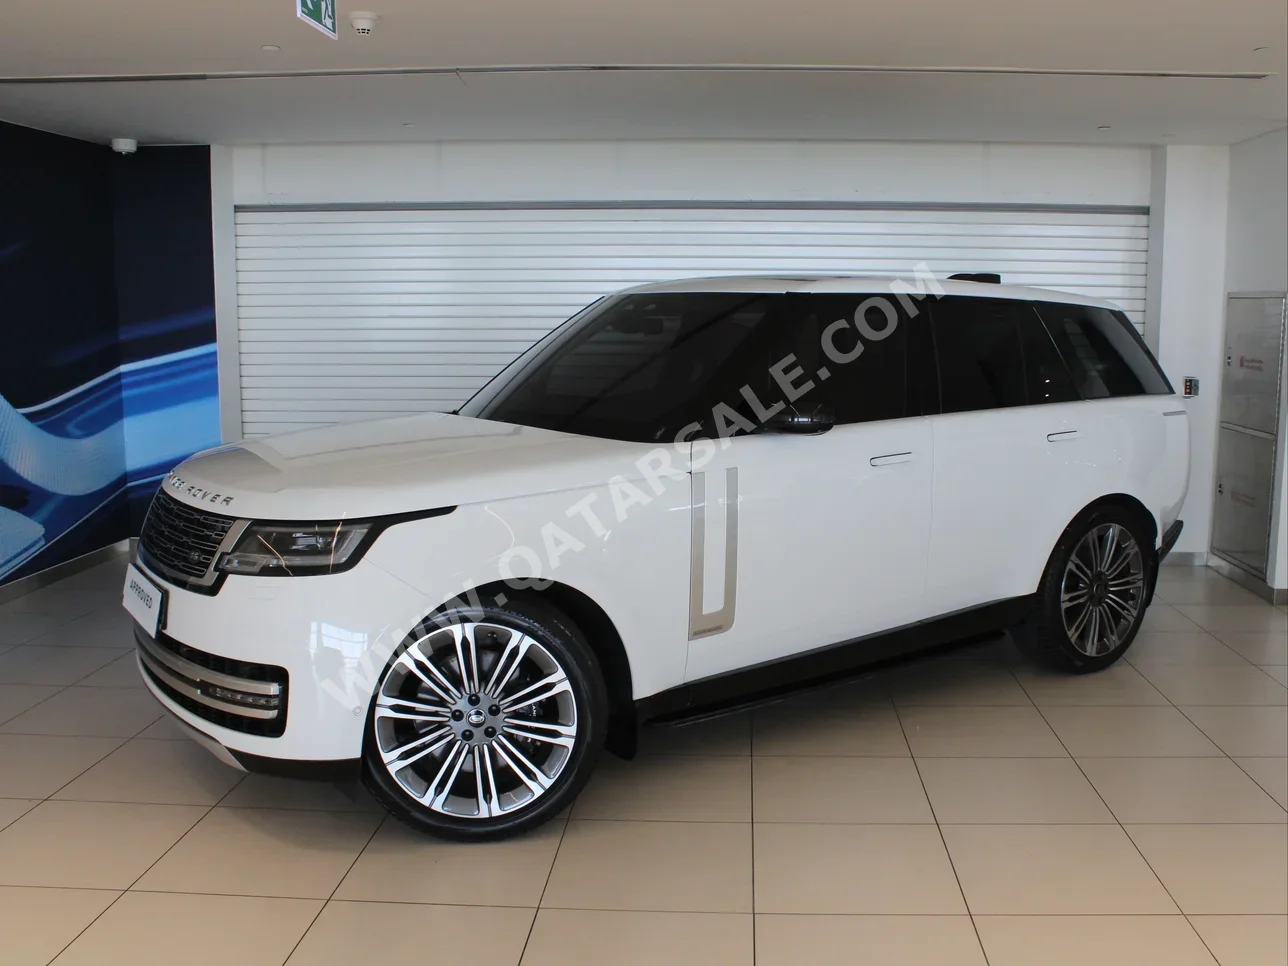 Land Rover  Range Rover  Vogue  Autobiography  2023  Automatic  2,600 Km  8 Cylinder  Four Wheel Drive (4WD)  SUV  White  With Warranty